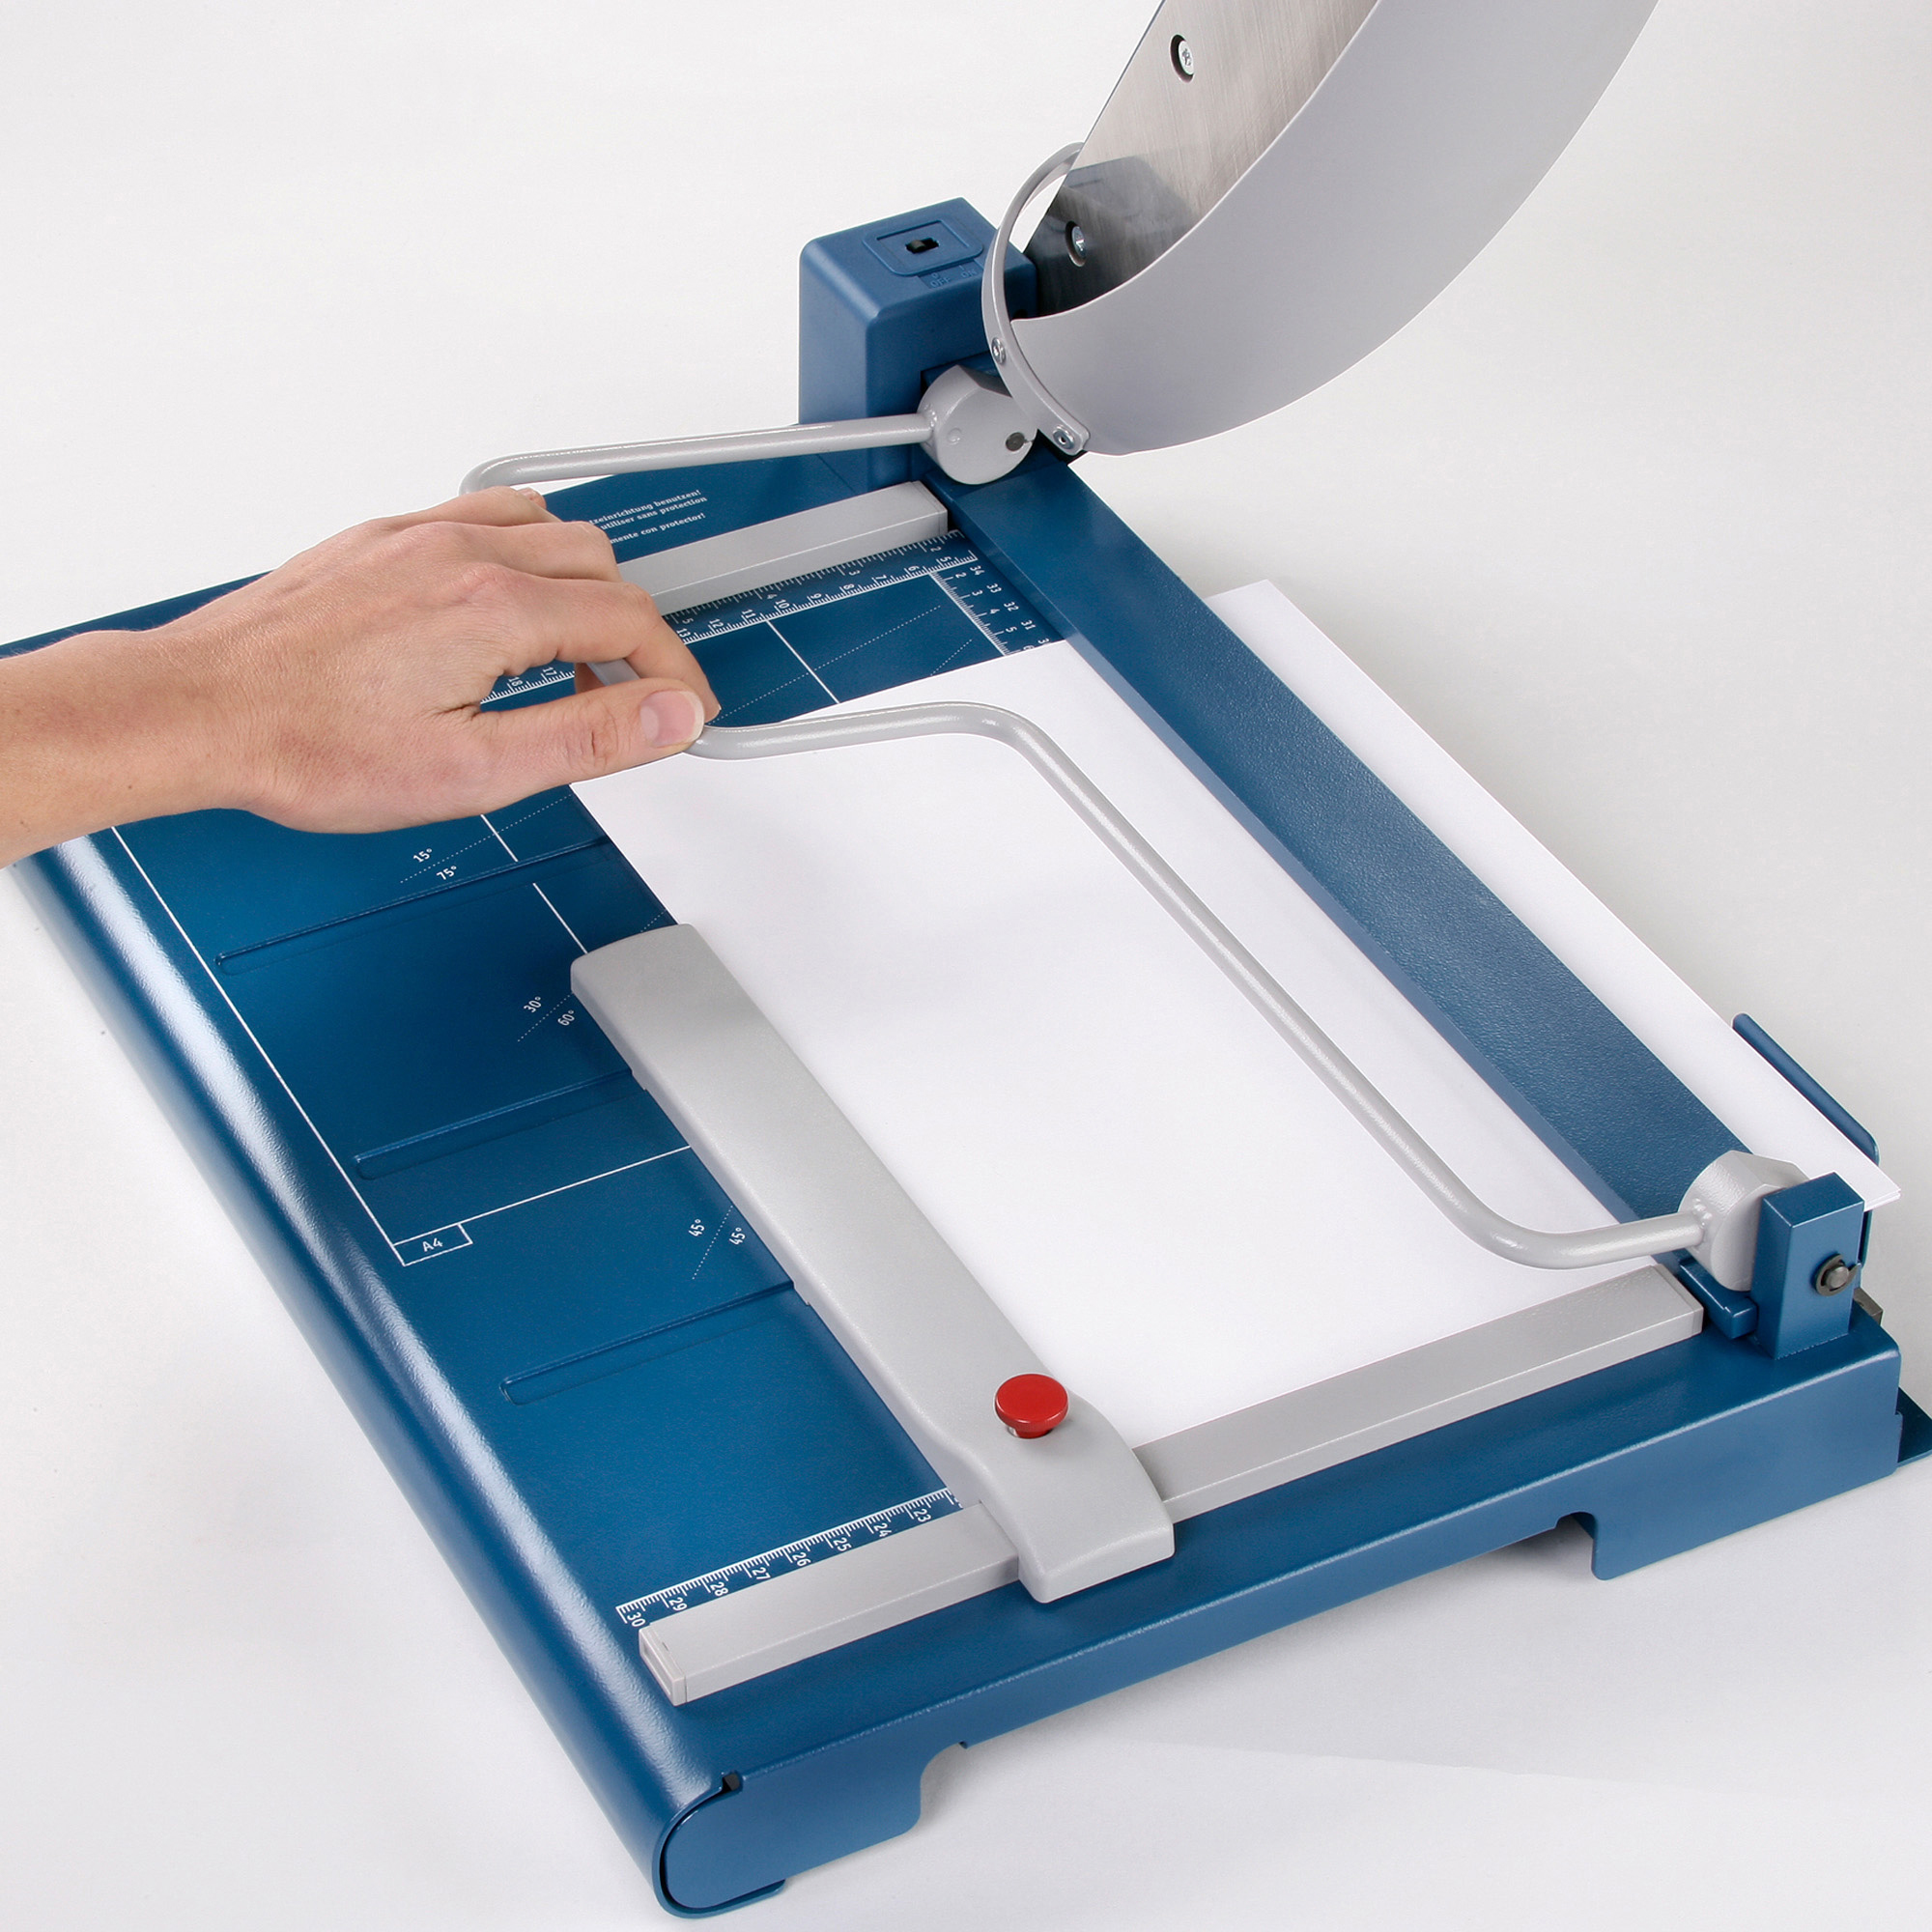 paper cutter paper trimmer with safety